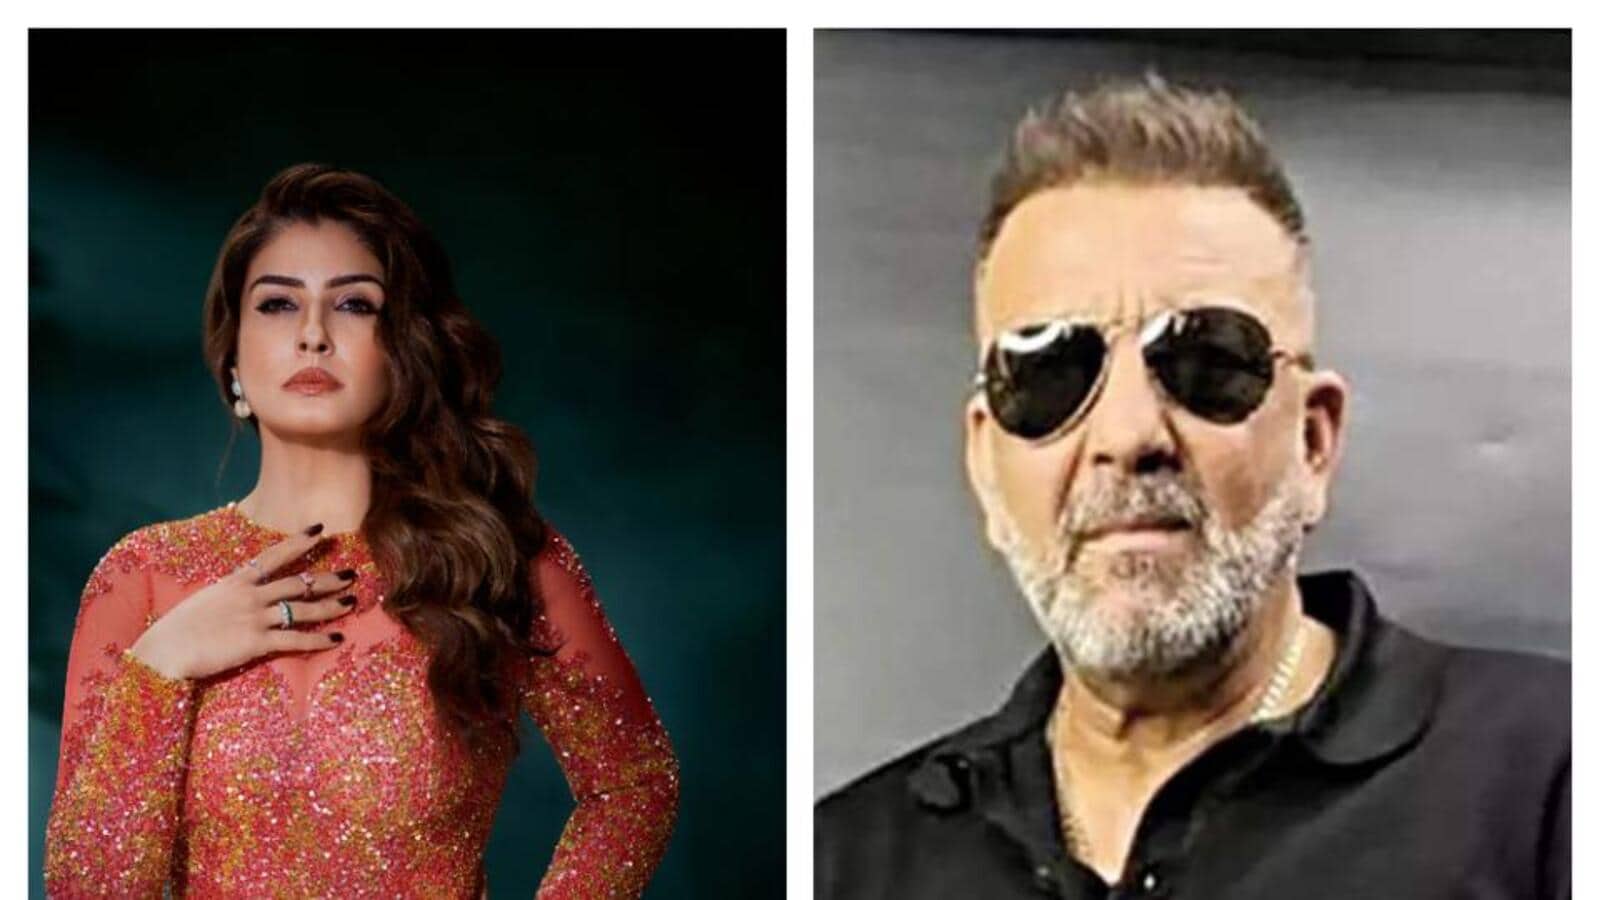 Sanjay Dutt and Raveena Tandon are set to have a historical date with Delhi while shooting for their next